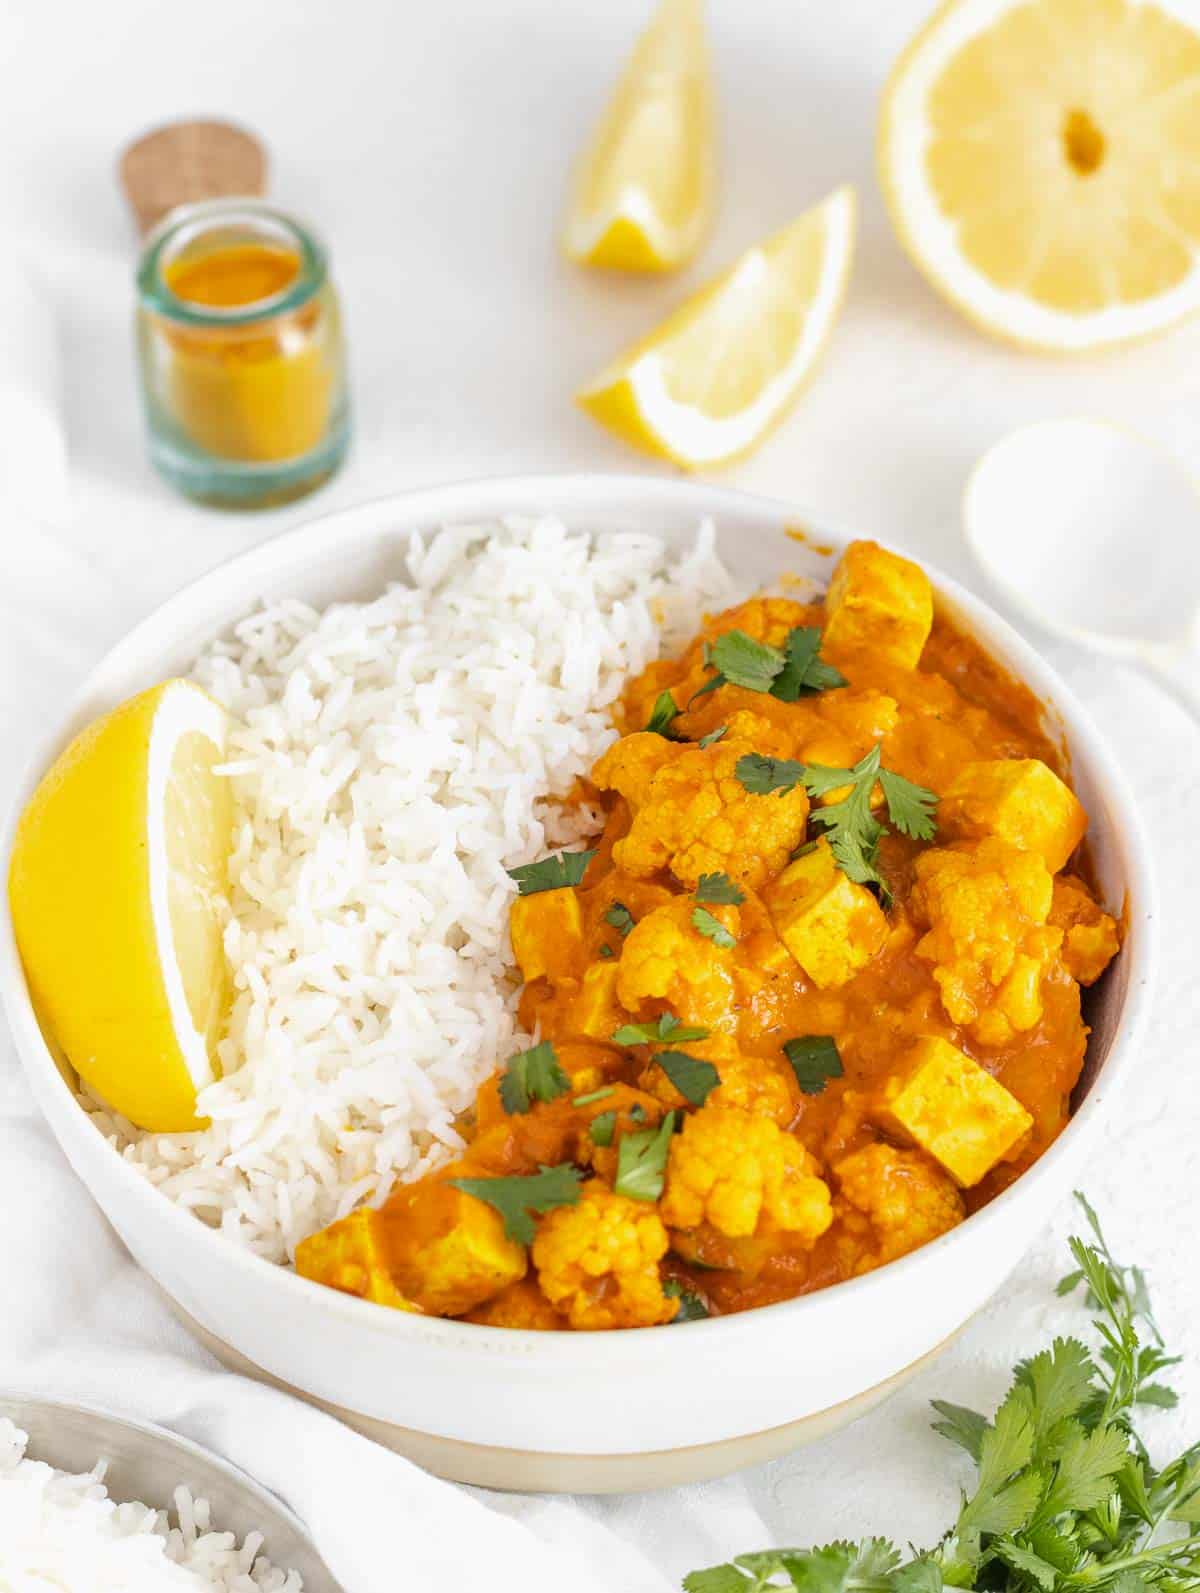 vegan curry served in a bowl with basmati rice, cilantro and lemon wedges